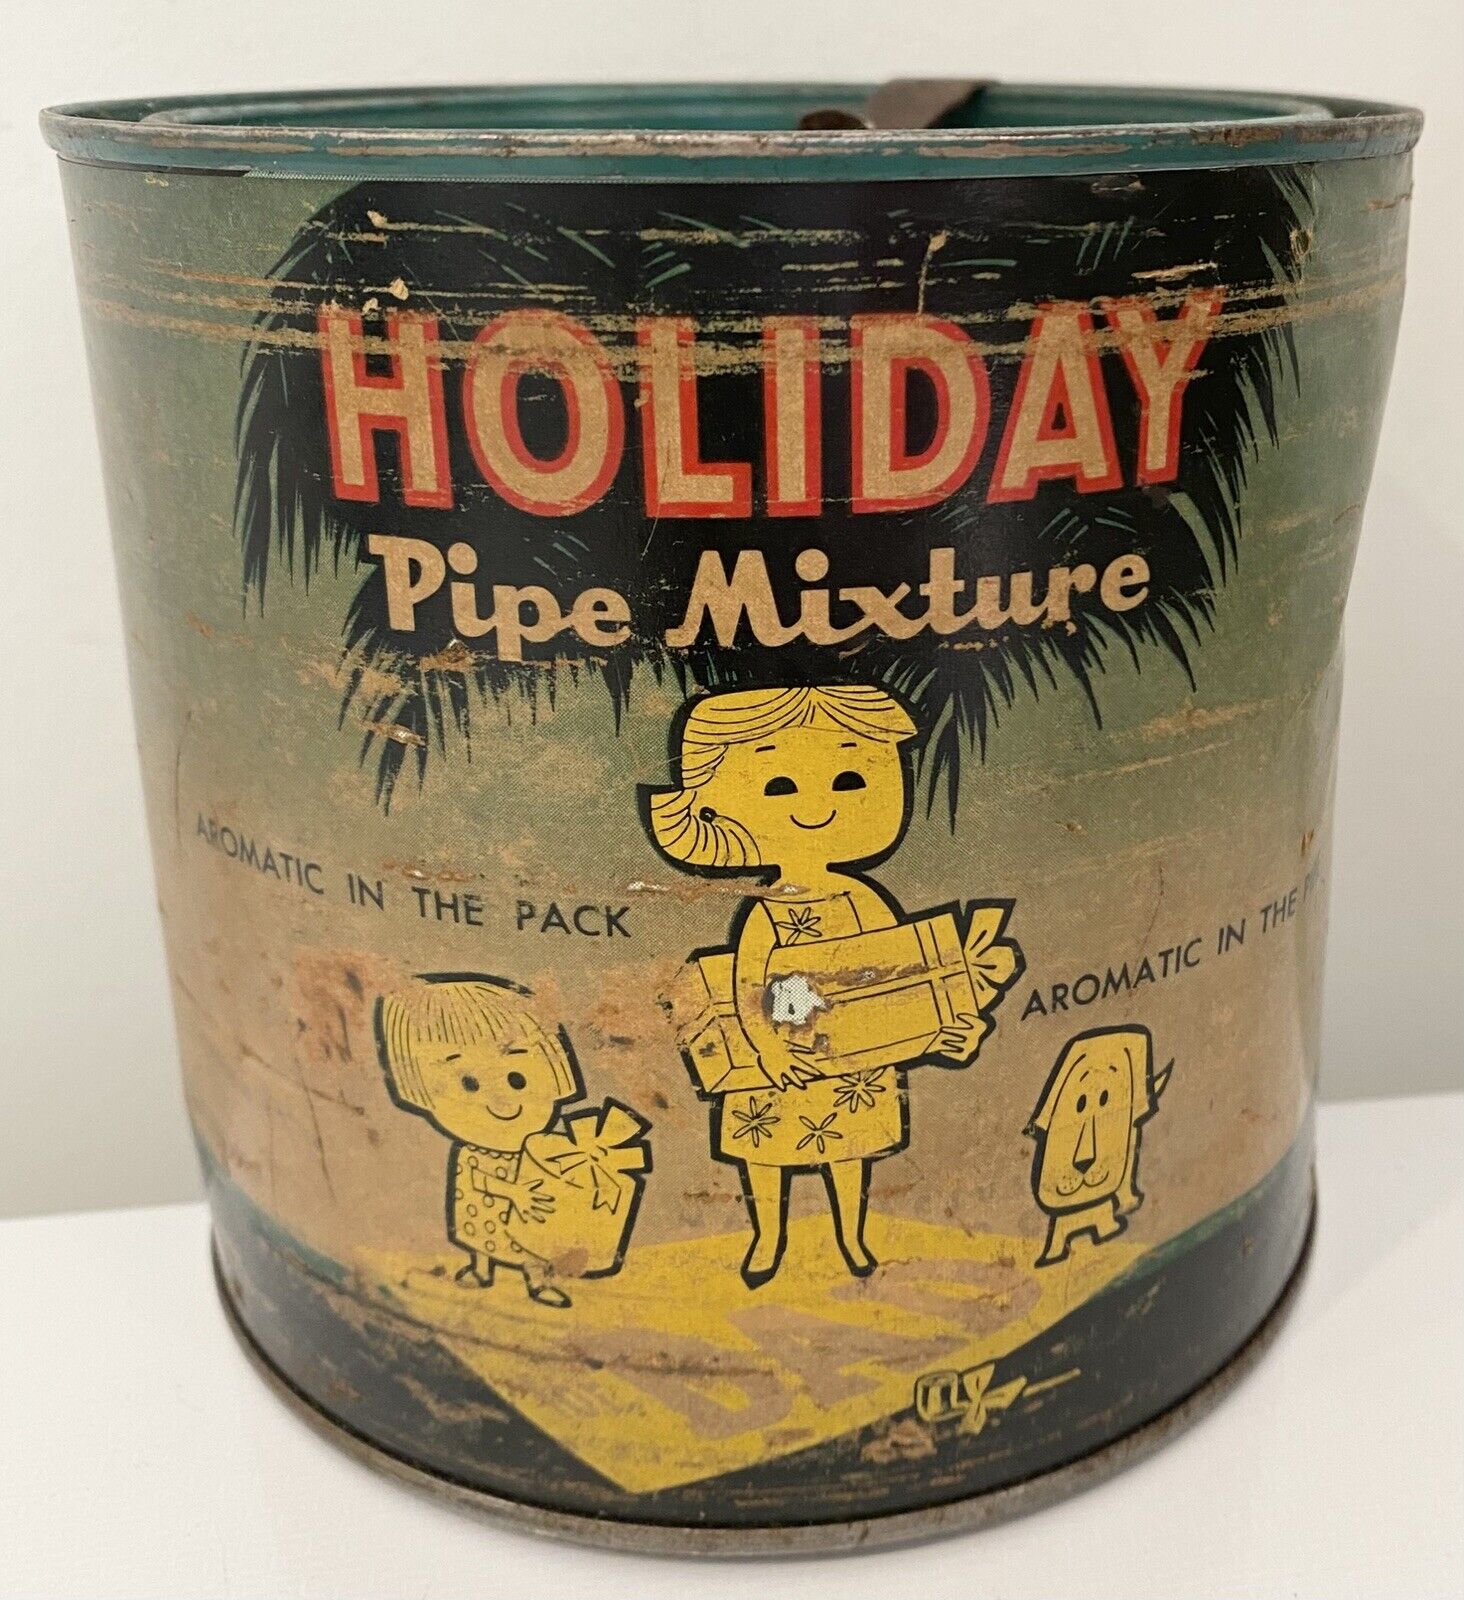 Vintage VERY RARE Holiday Pipe Mixture Christmas Tobacco Tin Can Paper Label